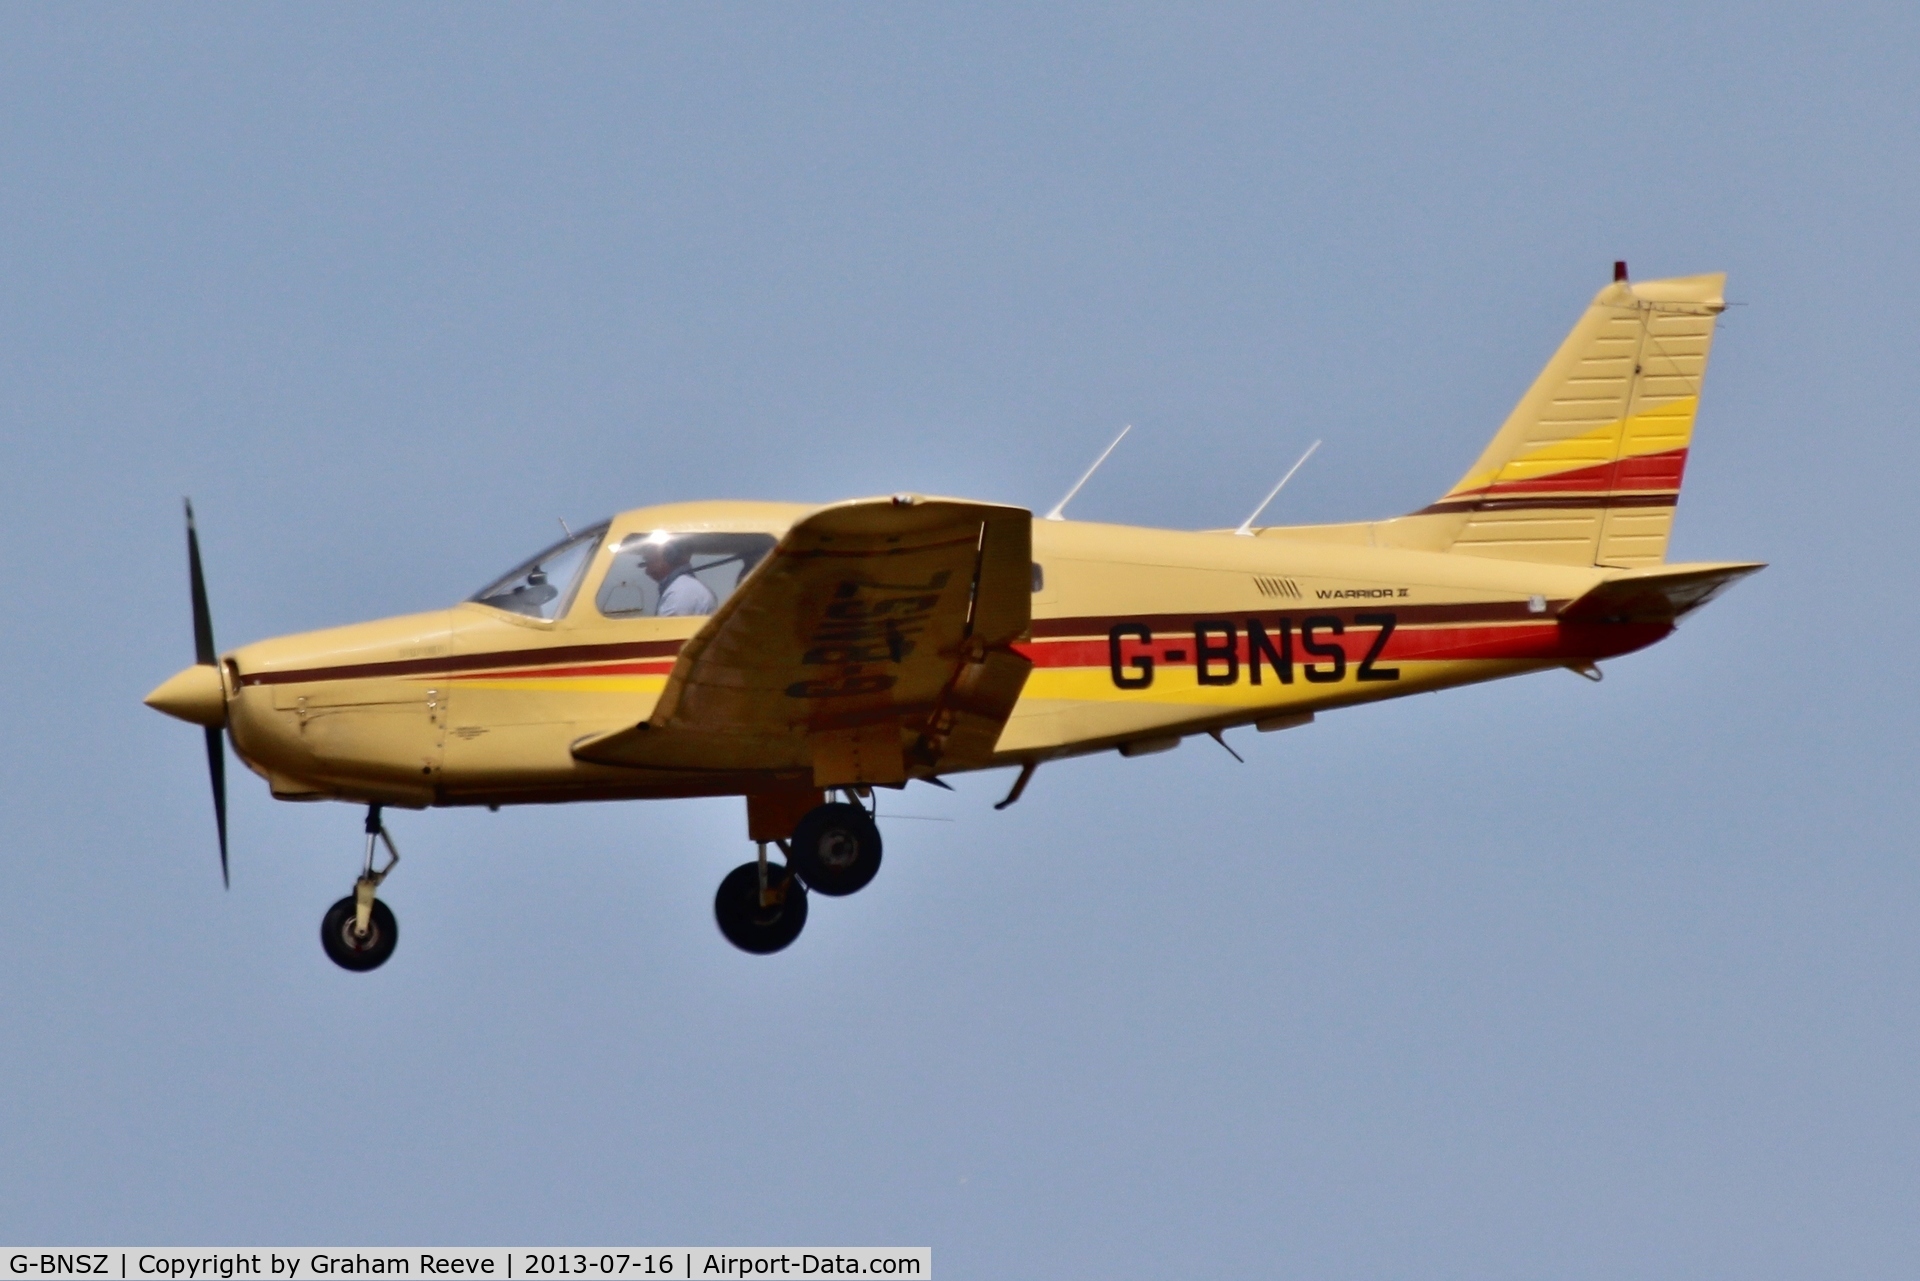 G-BNSZ, 1981 Piper PA-28-161 Cherokee Warrior II C/N 28-8116315, About to land at Norwich.